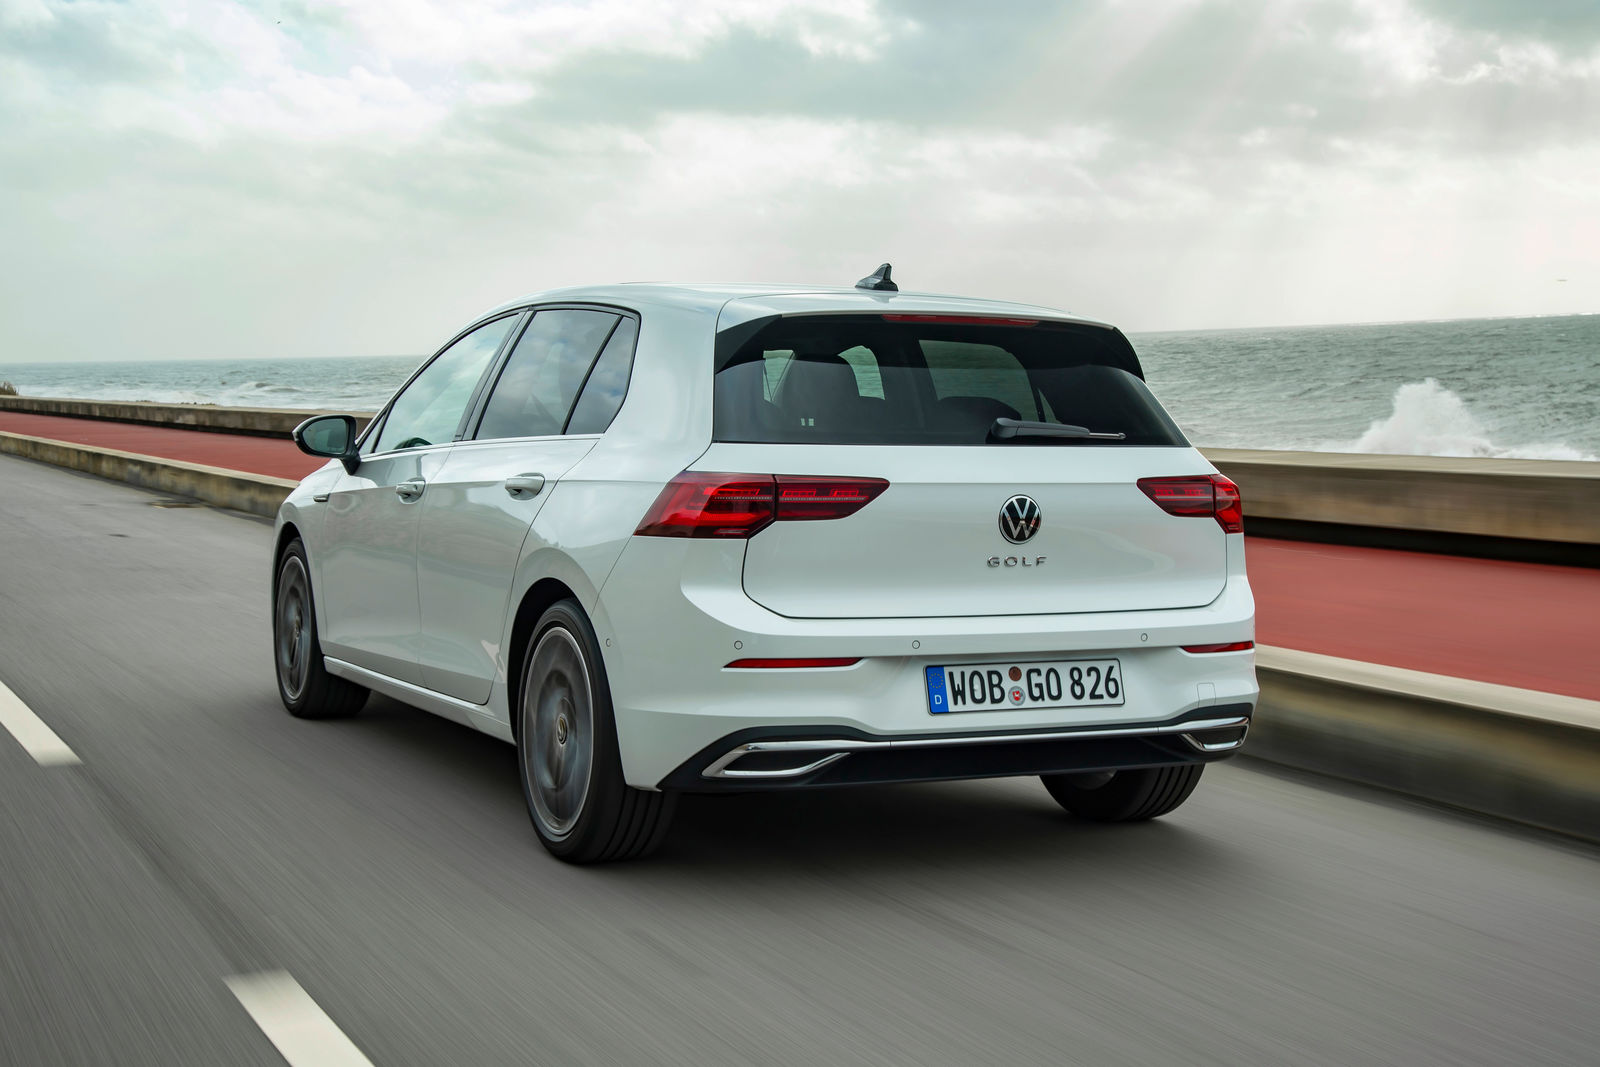 The technical data of the new Golf | Volkswagen Newsroom